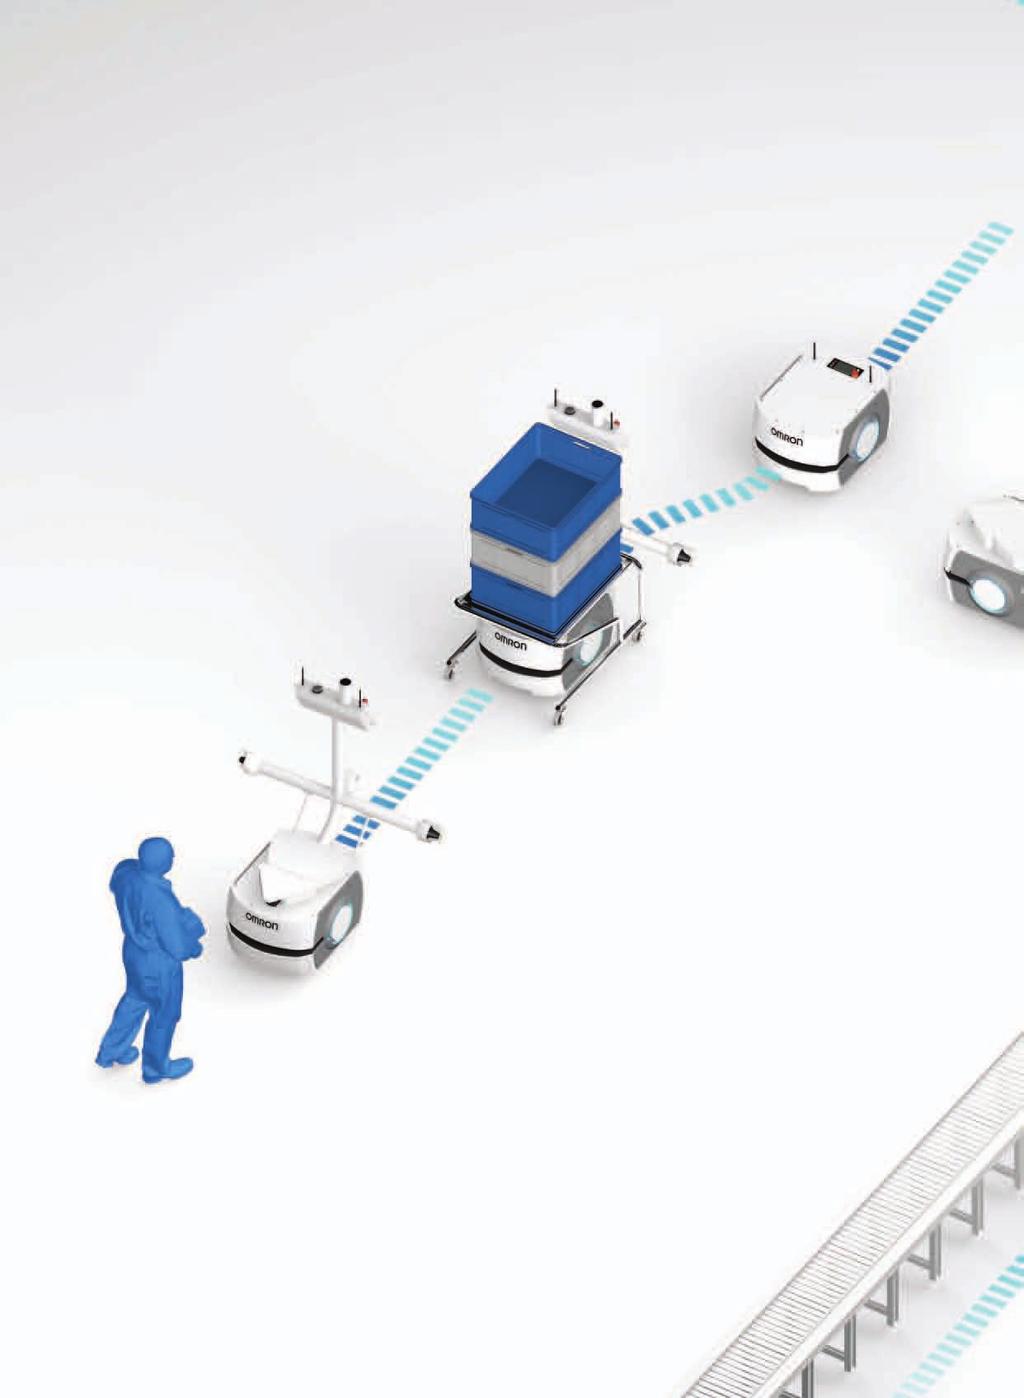 Mobile Robots Transforming manufacturing and logistics Modernize Your Workflow Omron mobile robots are Autonomous Intelligent Vehicles (AIVs) designed to dramatically increase productivity in